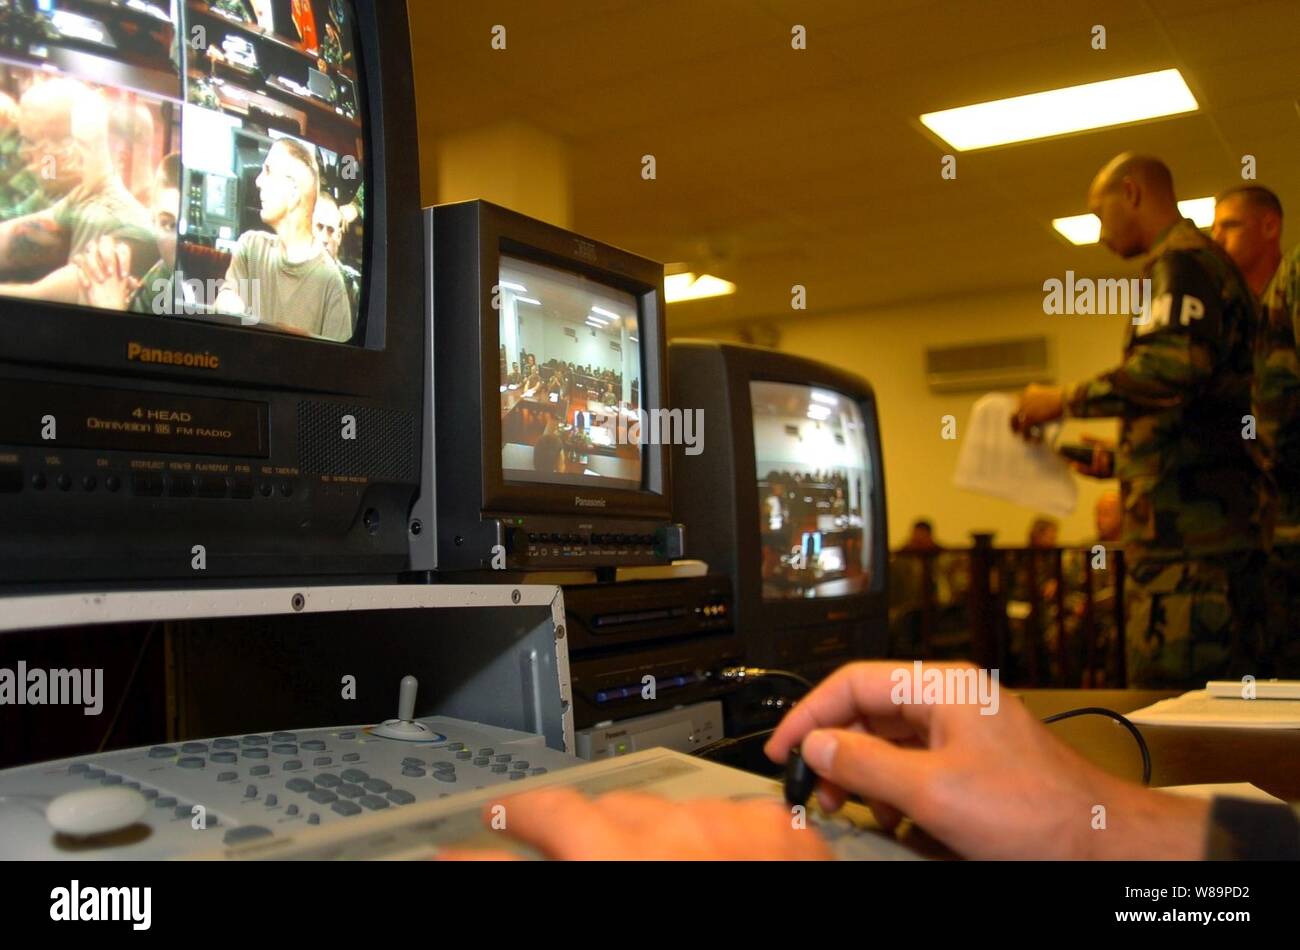 A closed-circuit television system is tested during a commissions rehearsal in the Joint Task Force Guantanamo courtroom at Guantanamo Bay, Cuba, on Oct. 29, 2004.  During the commissions, a live video feed of the proceedings are sent to an auditorium at nearby Bulkeley Hall for members of the news media to watch and report on.  The first U.S. military commissions in more than 50 years took place in this courtroom from August 24th through August 27th of 2004.  Military commissions have historically been used to try violations of the law of war.  Panels are comprised of three to seven military Stock Photo